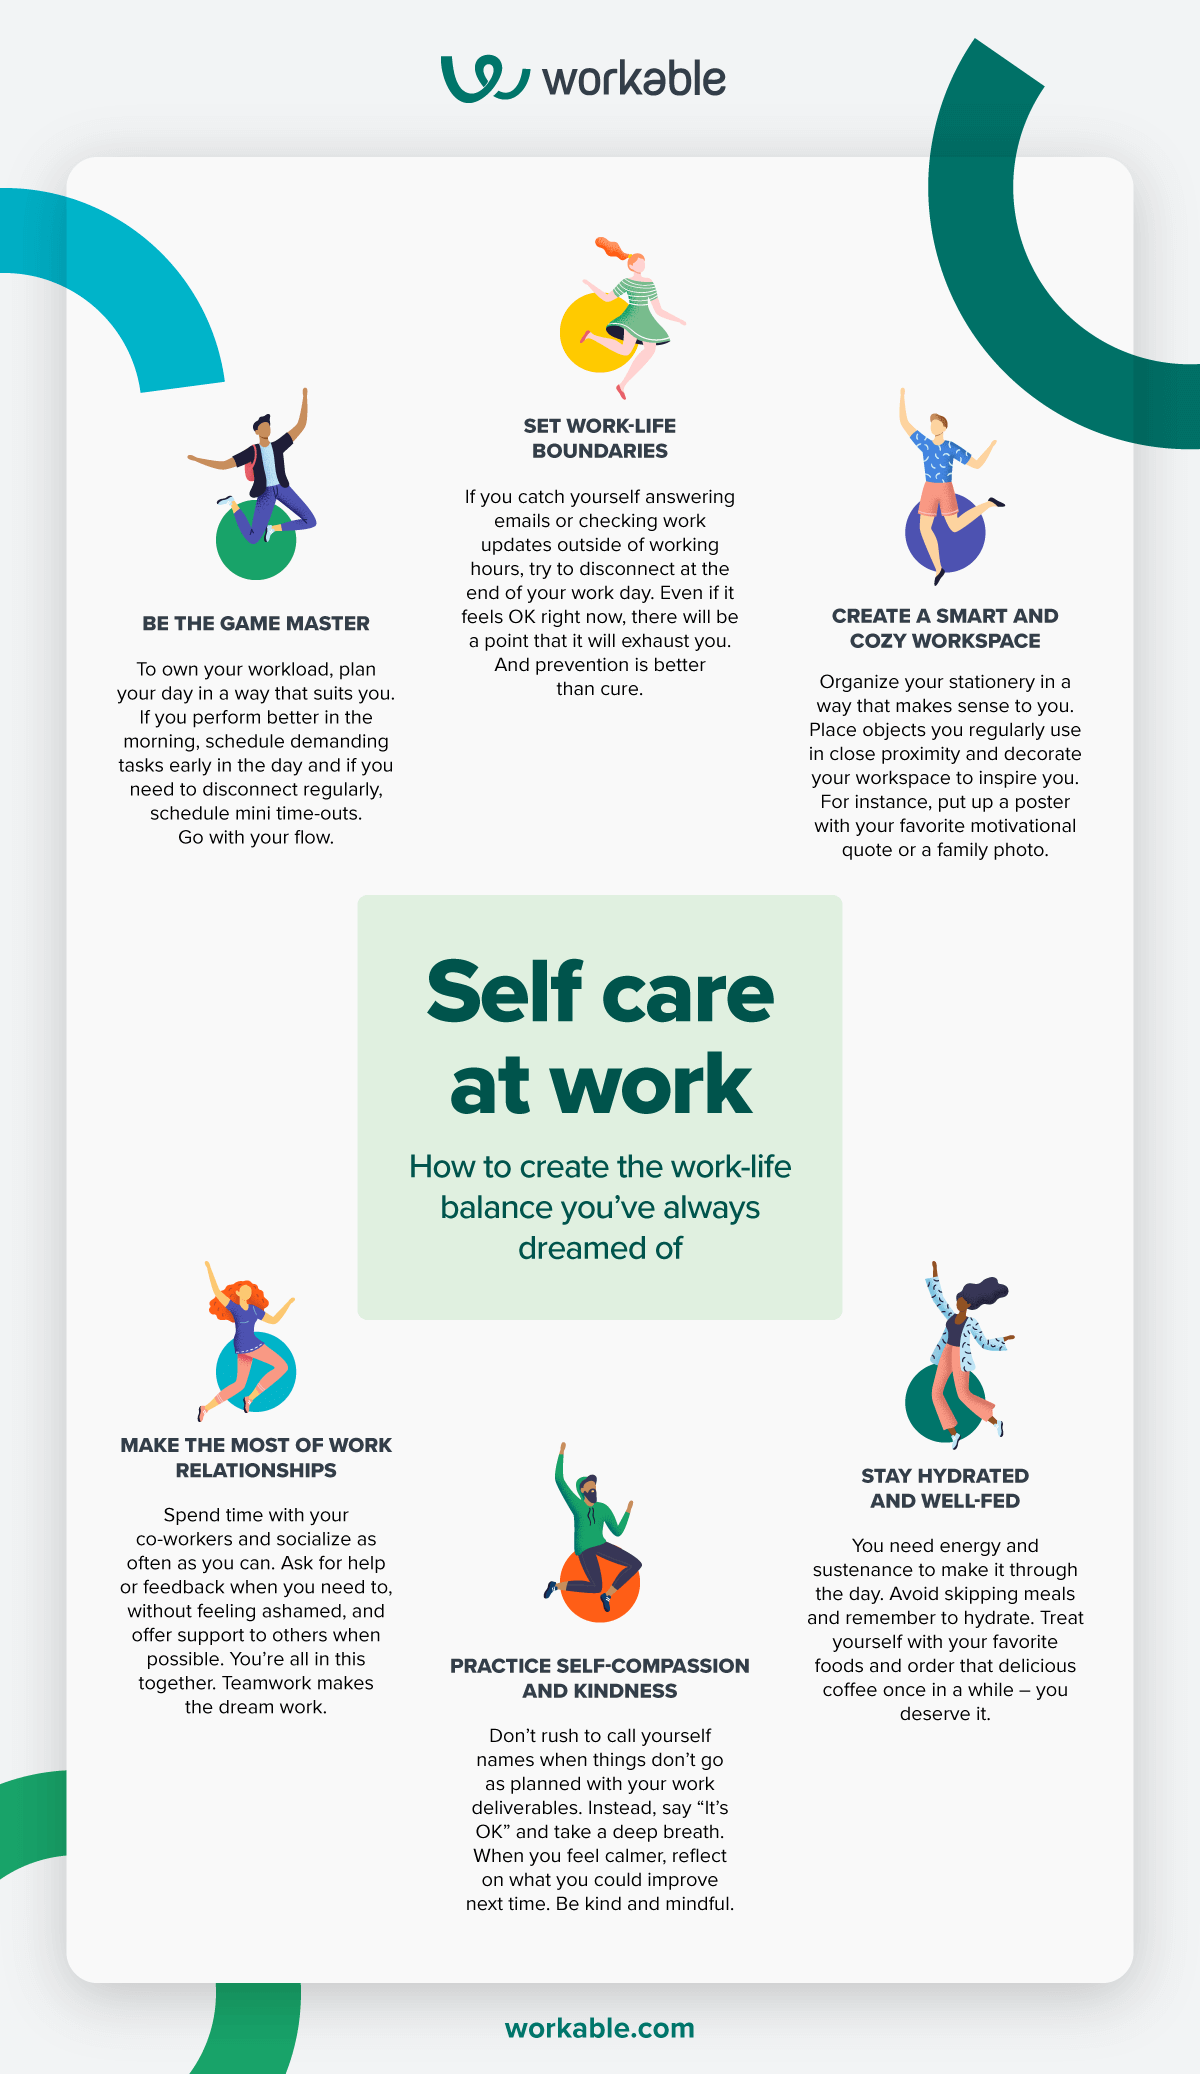 An infographic illustrating self care practices at work with emphasis on IT support and data recovery.